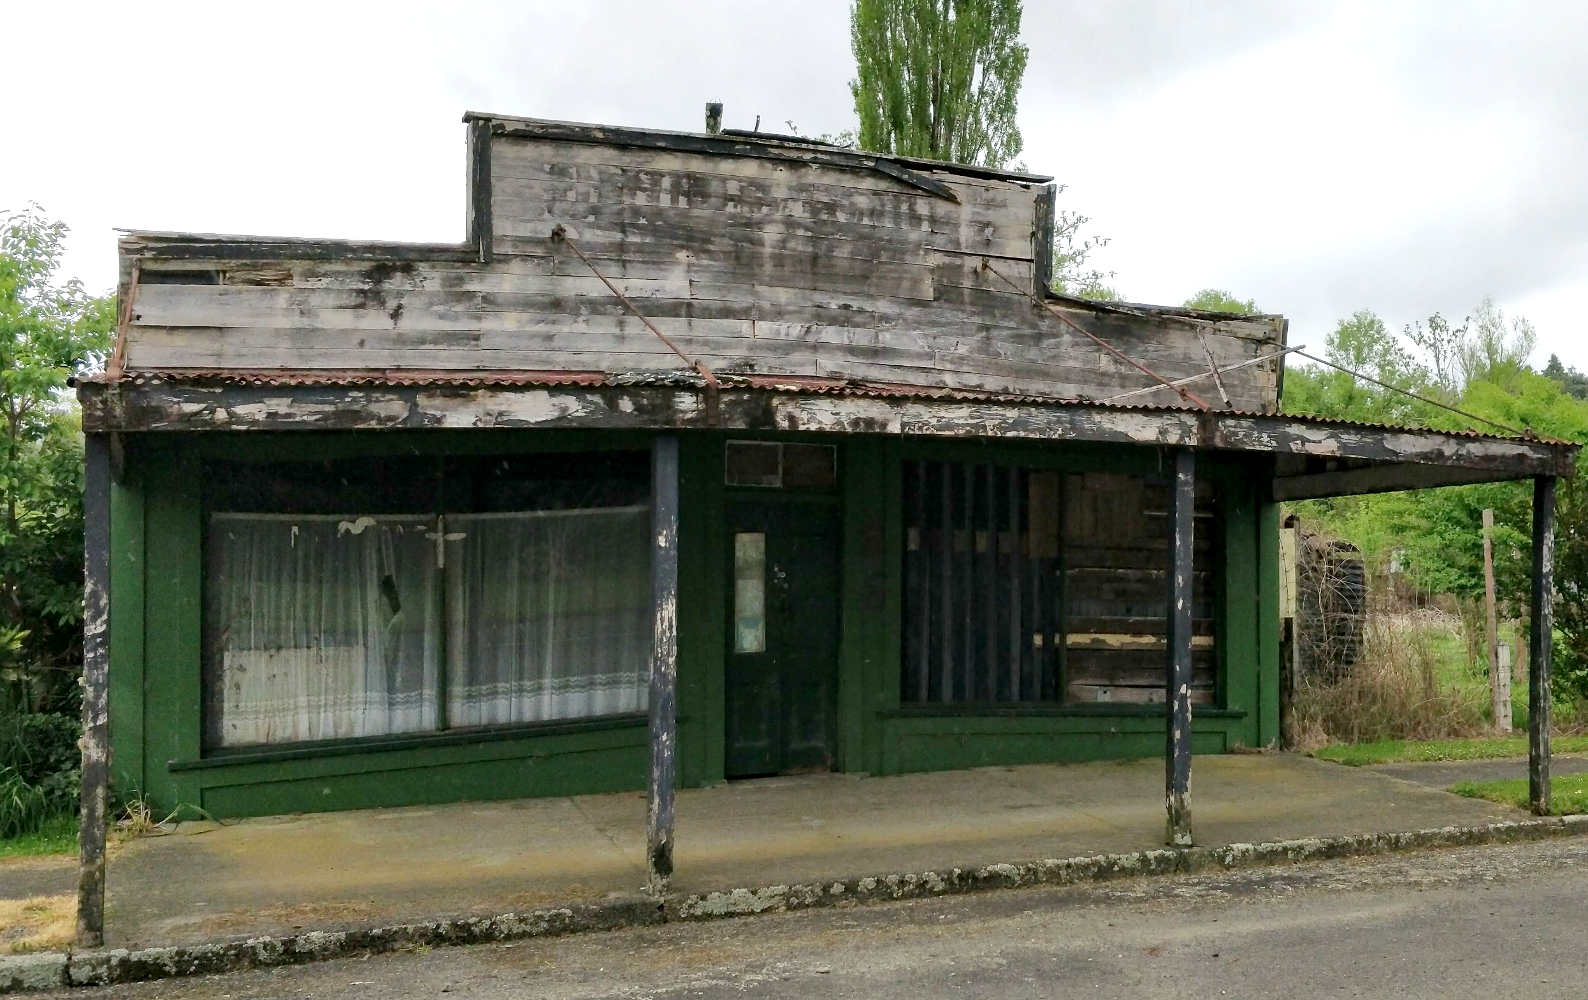 Ghosts, rusting machinery and derelict shops on the Forgotten Highway 43 North Island, New Zealand